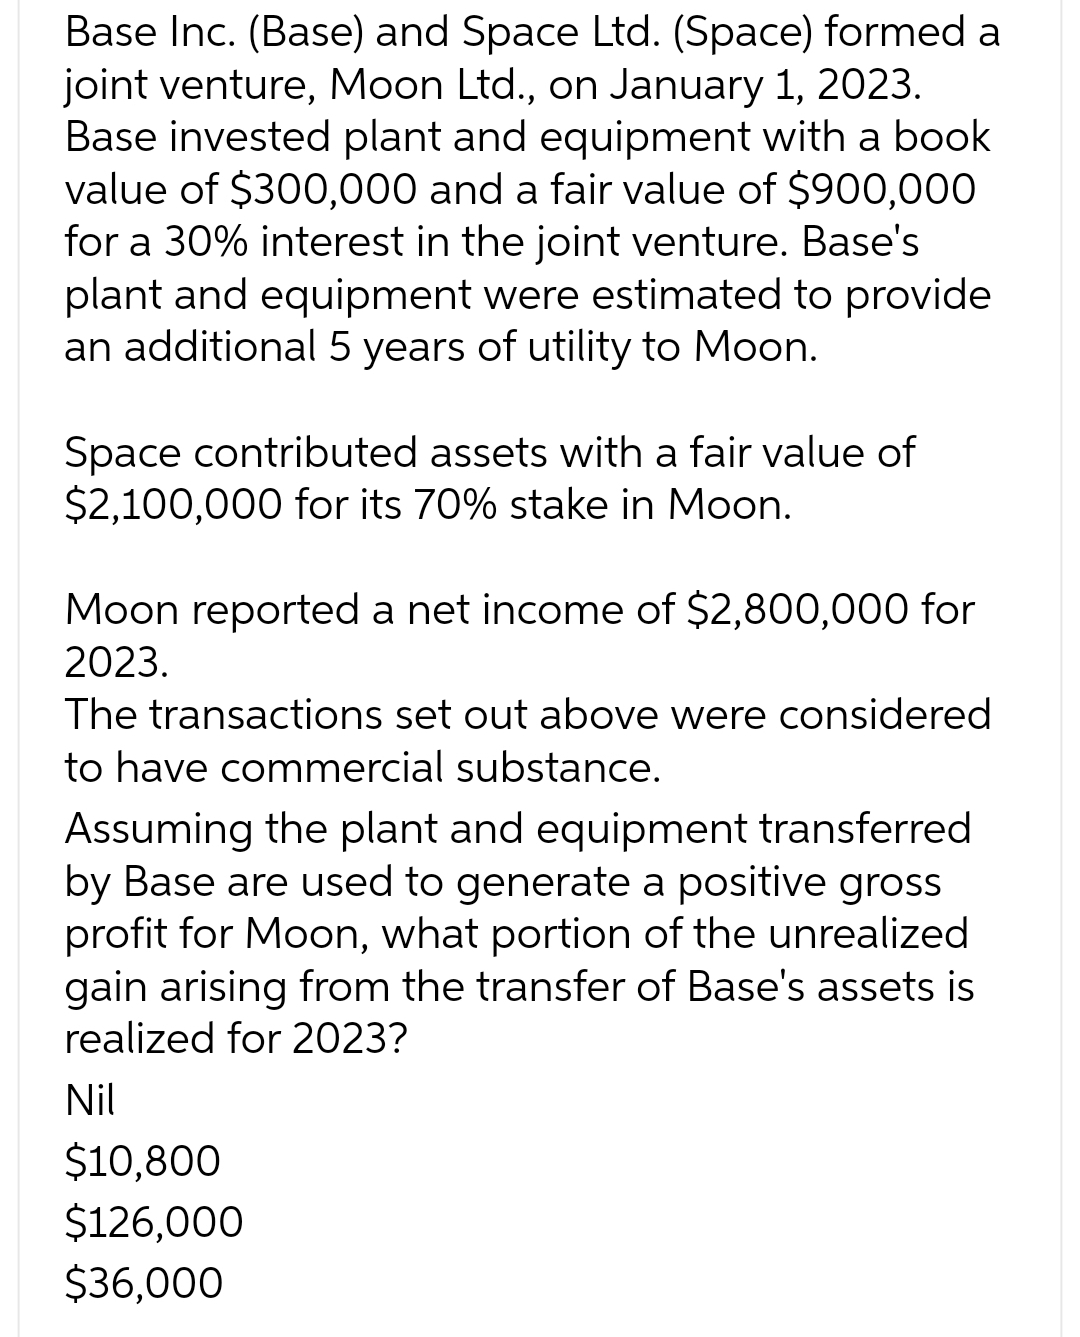 Base Inc. (Base) and Space Ltd. (Space) formed a
joint venture, Moon Ltd., on January 1, 2023.
Base invested plant and equipment with a book
value of $300,000 and a fair value of $900,000
for a 30% interest in the joint venture. Base's
plant and equipment were estimated to provide
an additional 5 years of utility to Moon.
Space contributed assets with a fair value of
$2,100,000 for its 70% stake in Moon.
Moon reported a net income of $2,800,000 for
2023.
The transactions set out above were considered
to have commercial substance.
Assuming the plant and equipment transferred
by Base are used to generate a positive gross
profit for Moon, what portion of the unrealized
gain arising from the transfer of Base's assets is
realized for 2023?
Nil
$10,800
$126,000
$36,000